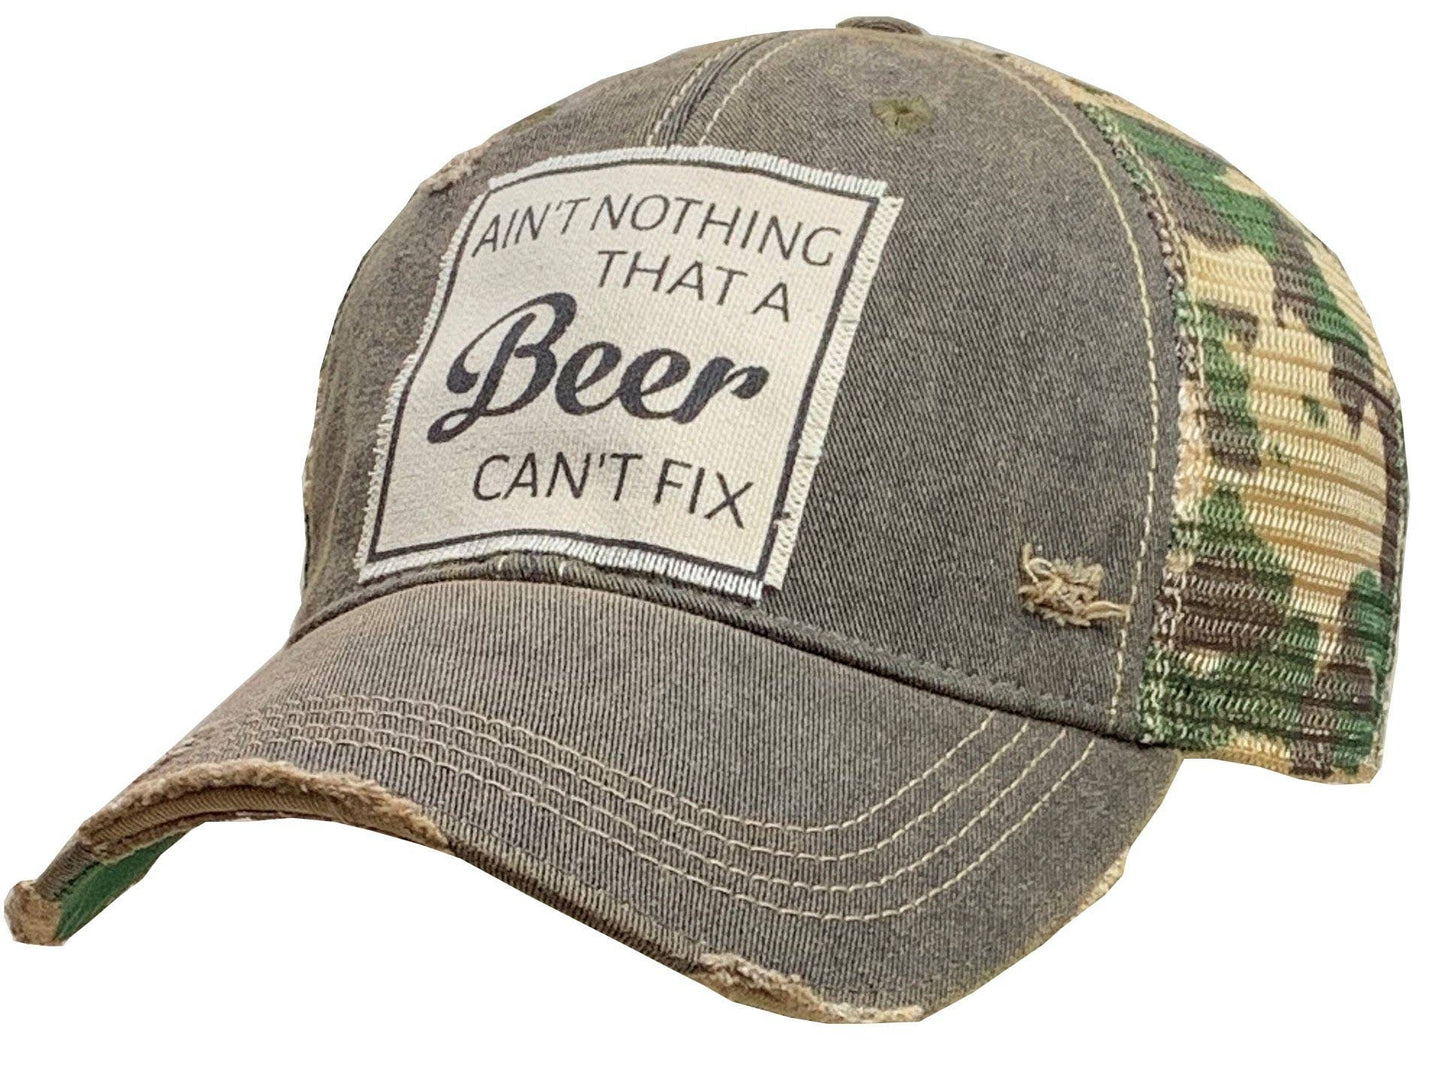 Ain't Nothing That A Beer Can't Fix Trucker Hat Baseball Cap